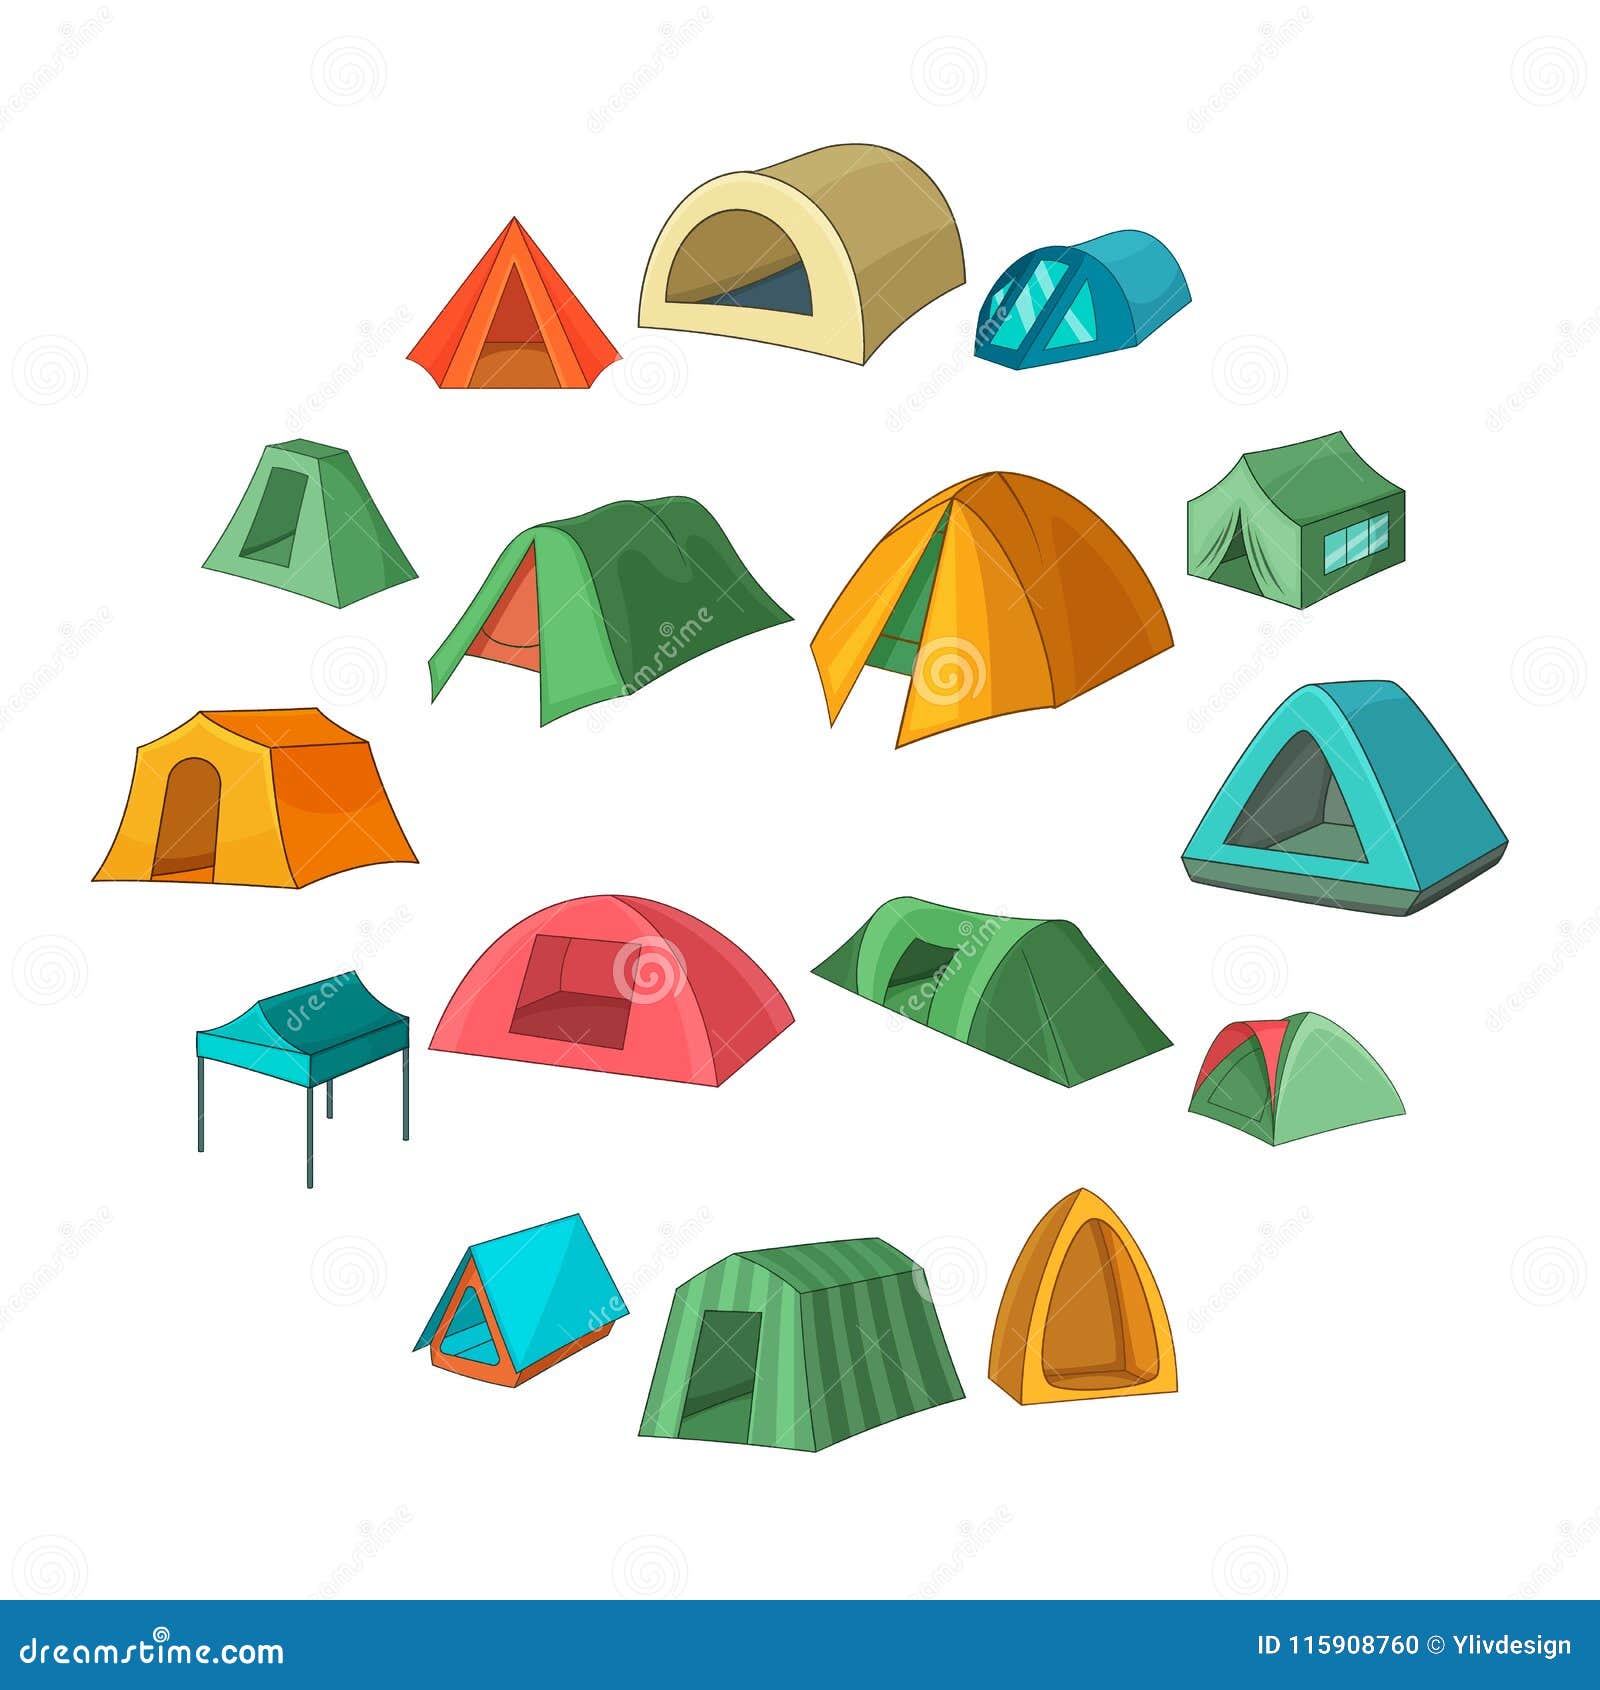 tent forms icons set, cartoon style